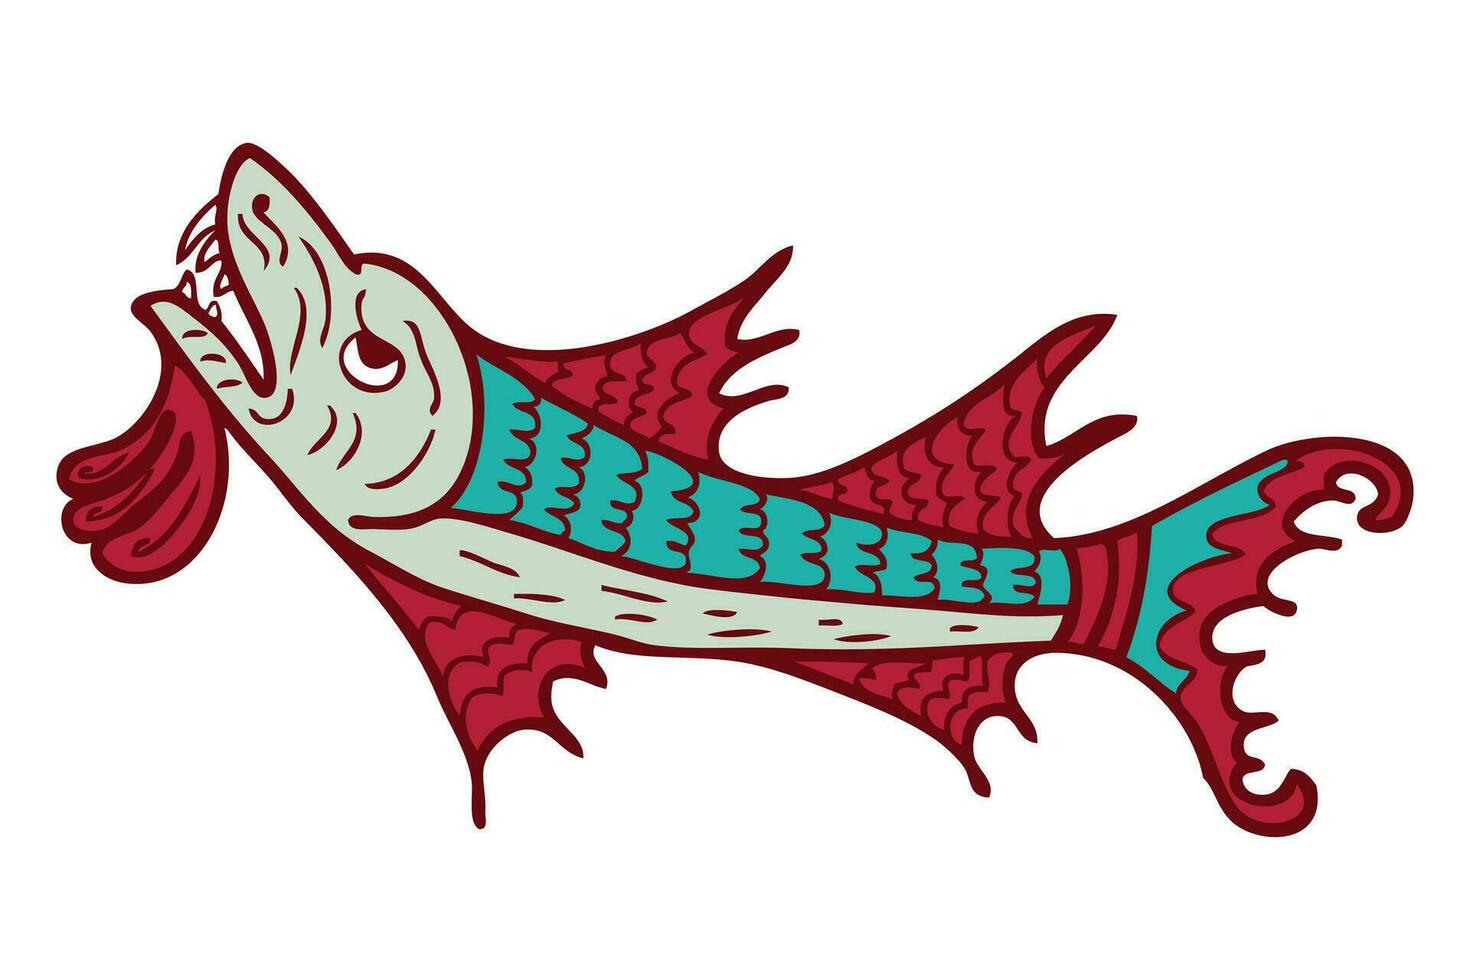 Middle ages bestiary style aquatic beast dragon fish doodle. Perfect for tee, sticker, card, poster. Hand drawn isolated vector illustration.